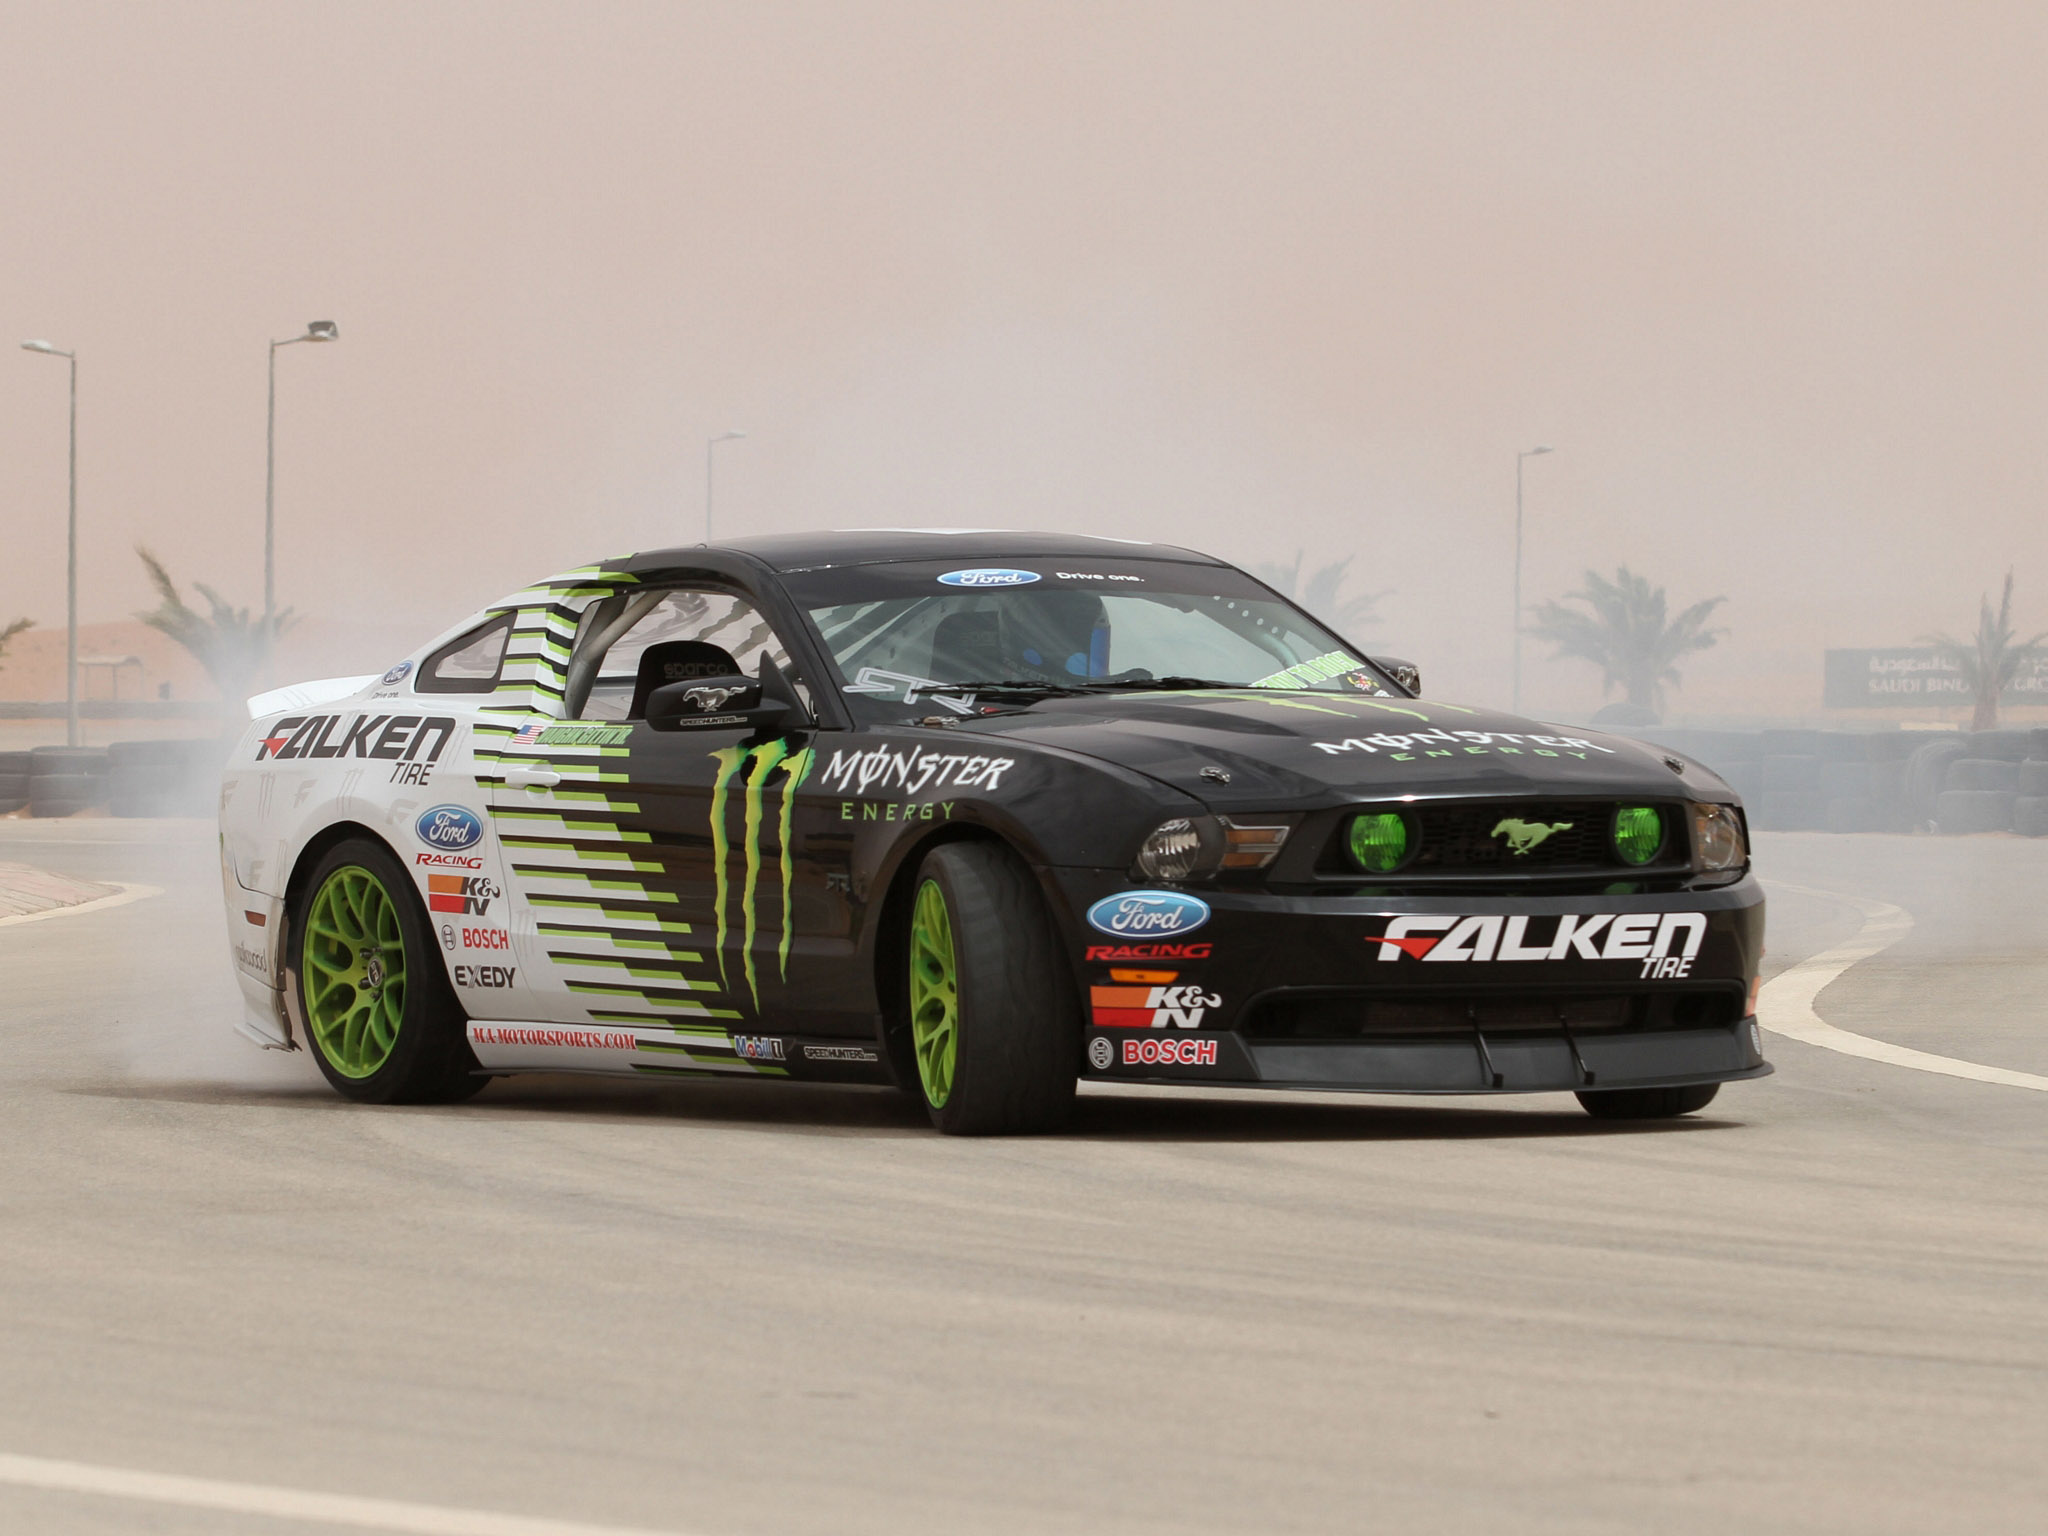 2011, Ford, Mustang, G t, Formula, Drift, Race, Raceing, Tuning, Muscle Wallpaper